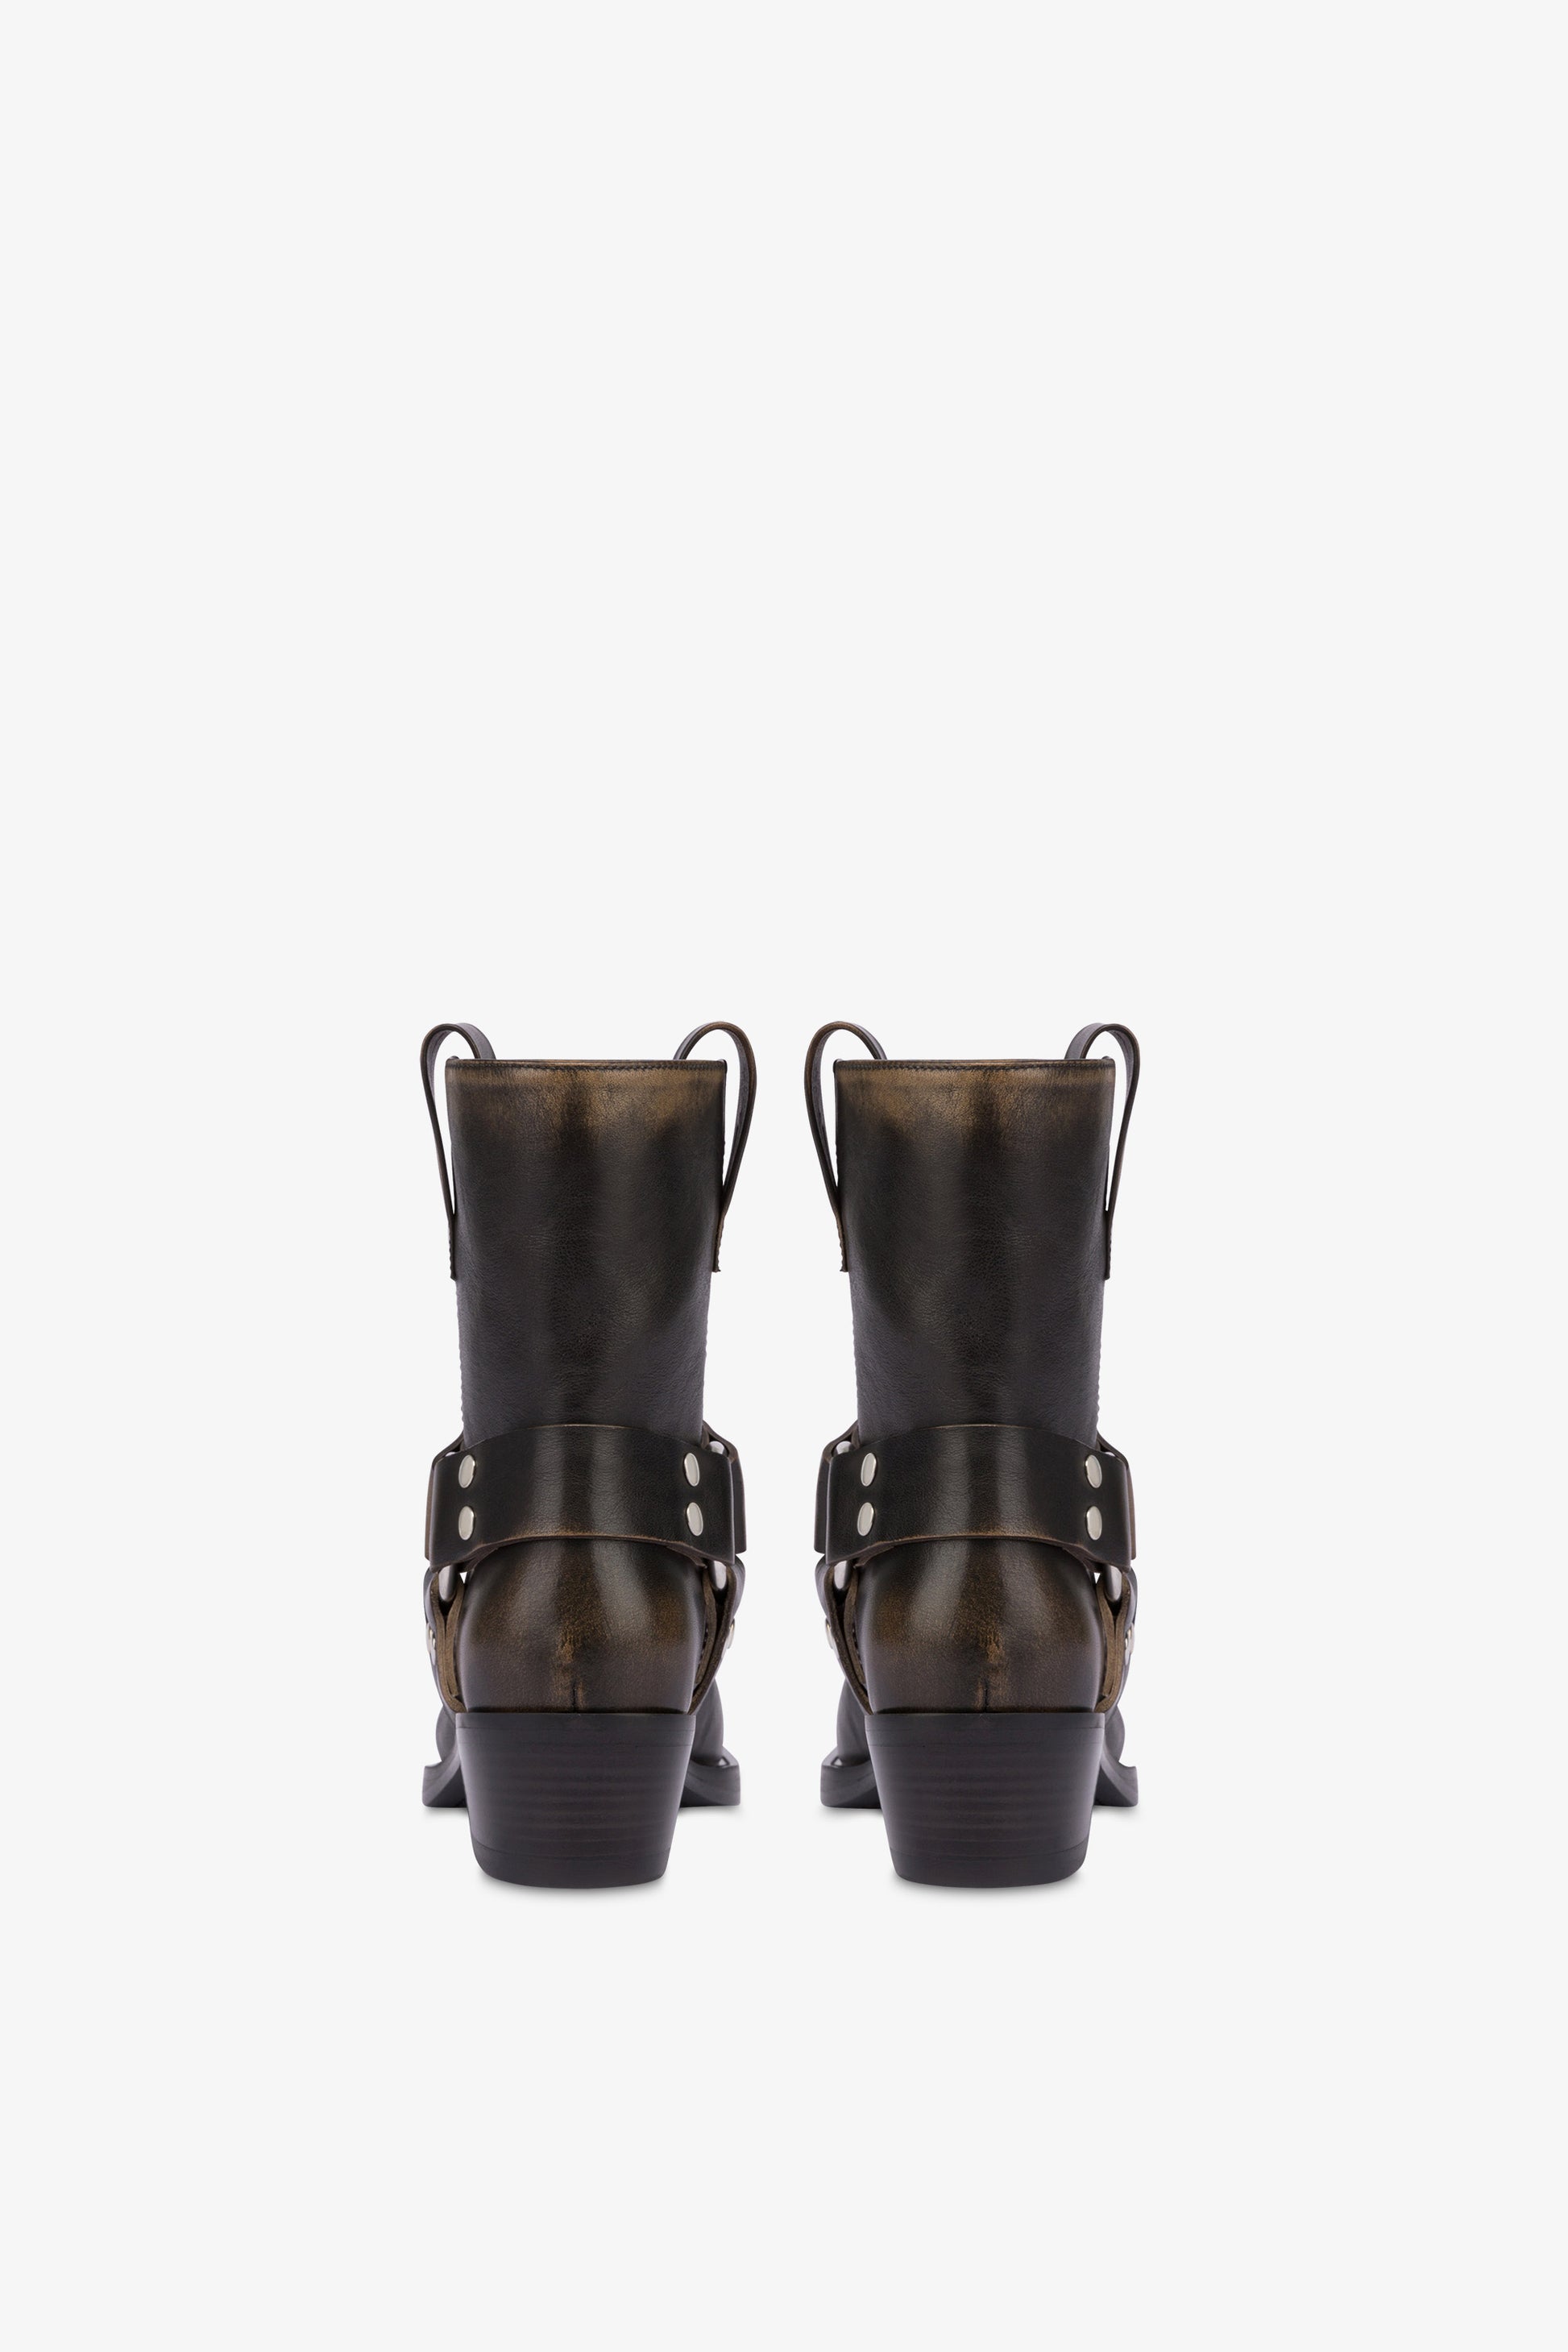 Square-toe ankle boots in soft black brushed leather